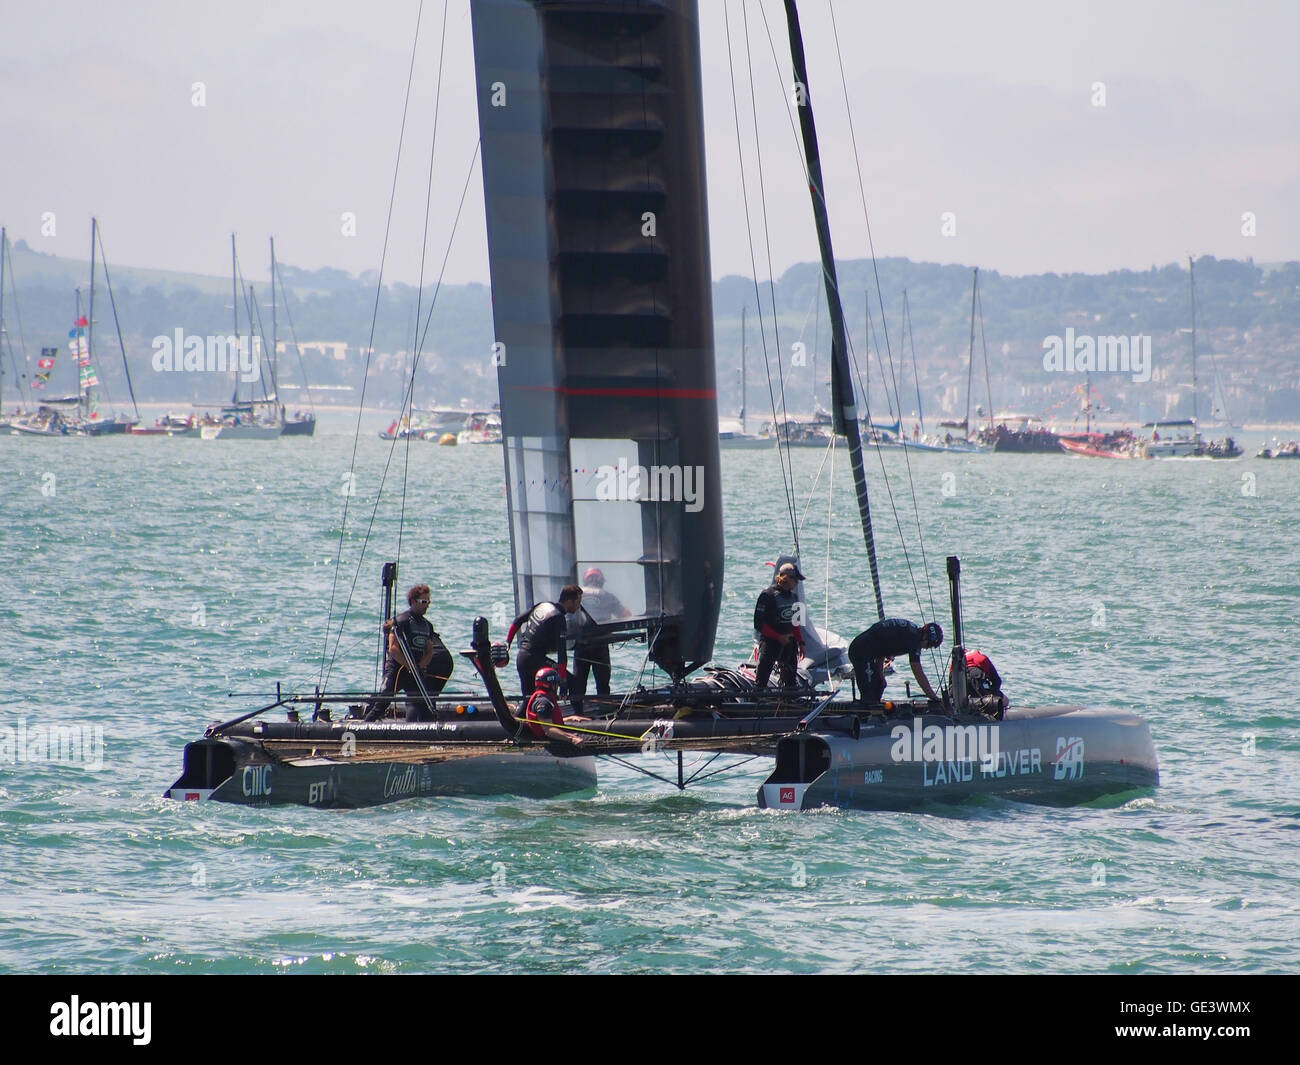 Portsmouth, England 23 July 2016. Team Land Rover Ben Ainslie racing make preparations for the first day of racing in the Americas Cup World Series, in the Solent. Credit:  simon evans/Alamy Live News Stock Photo